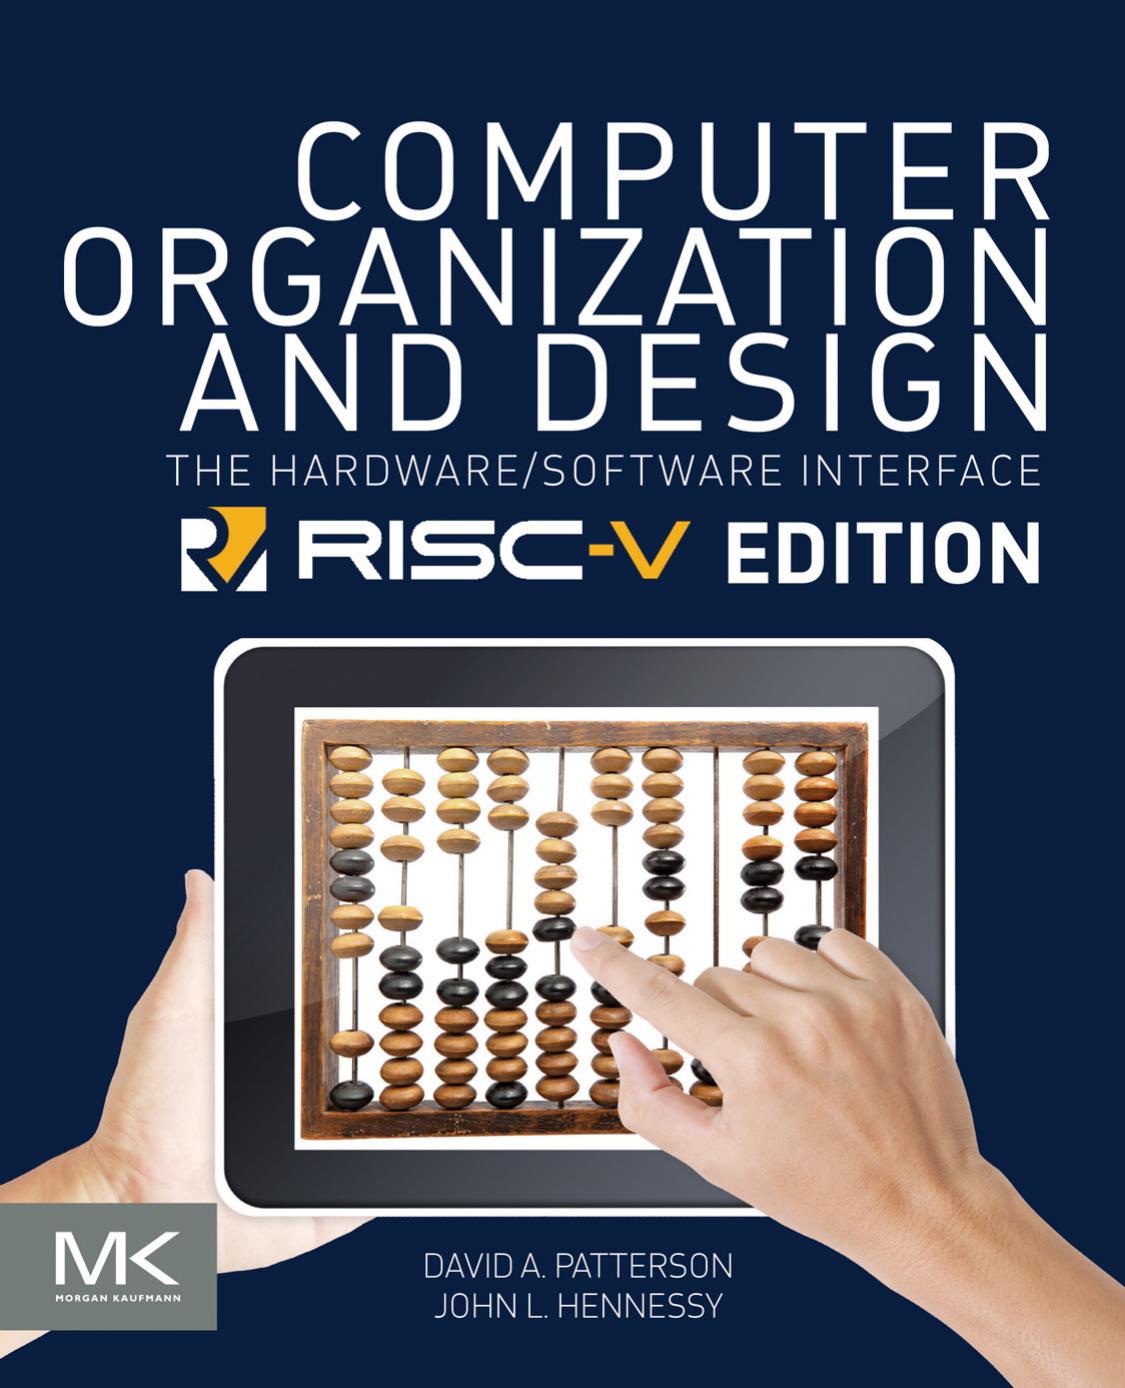 Computer Organization and Design: The Hardware-Software Interface RISC-V Edition by David A. Patterson & John L. Hennessy